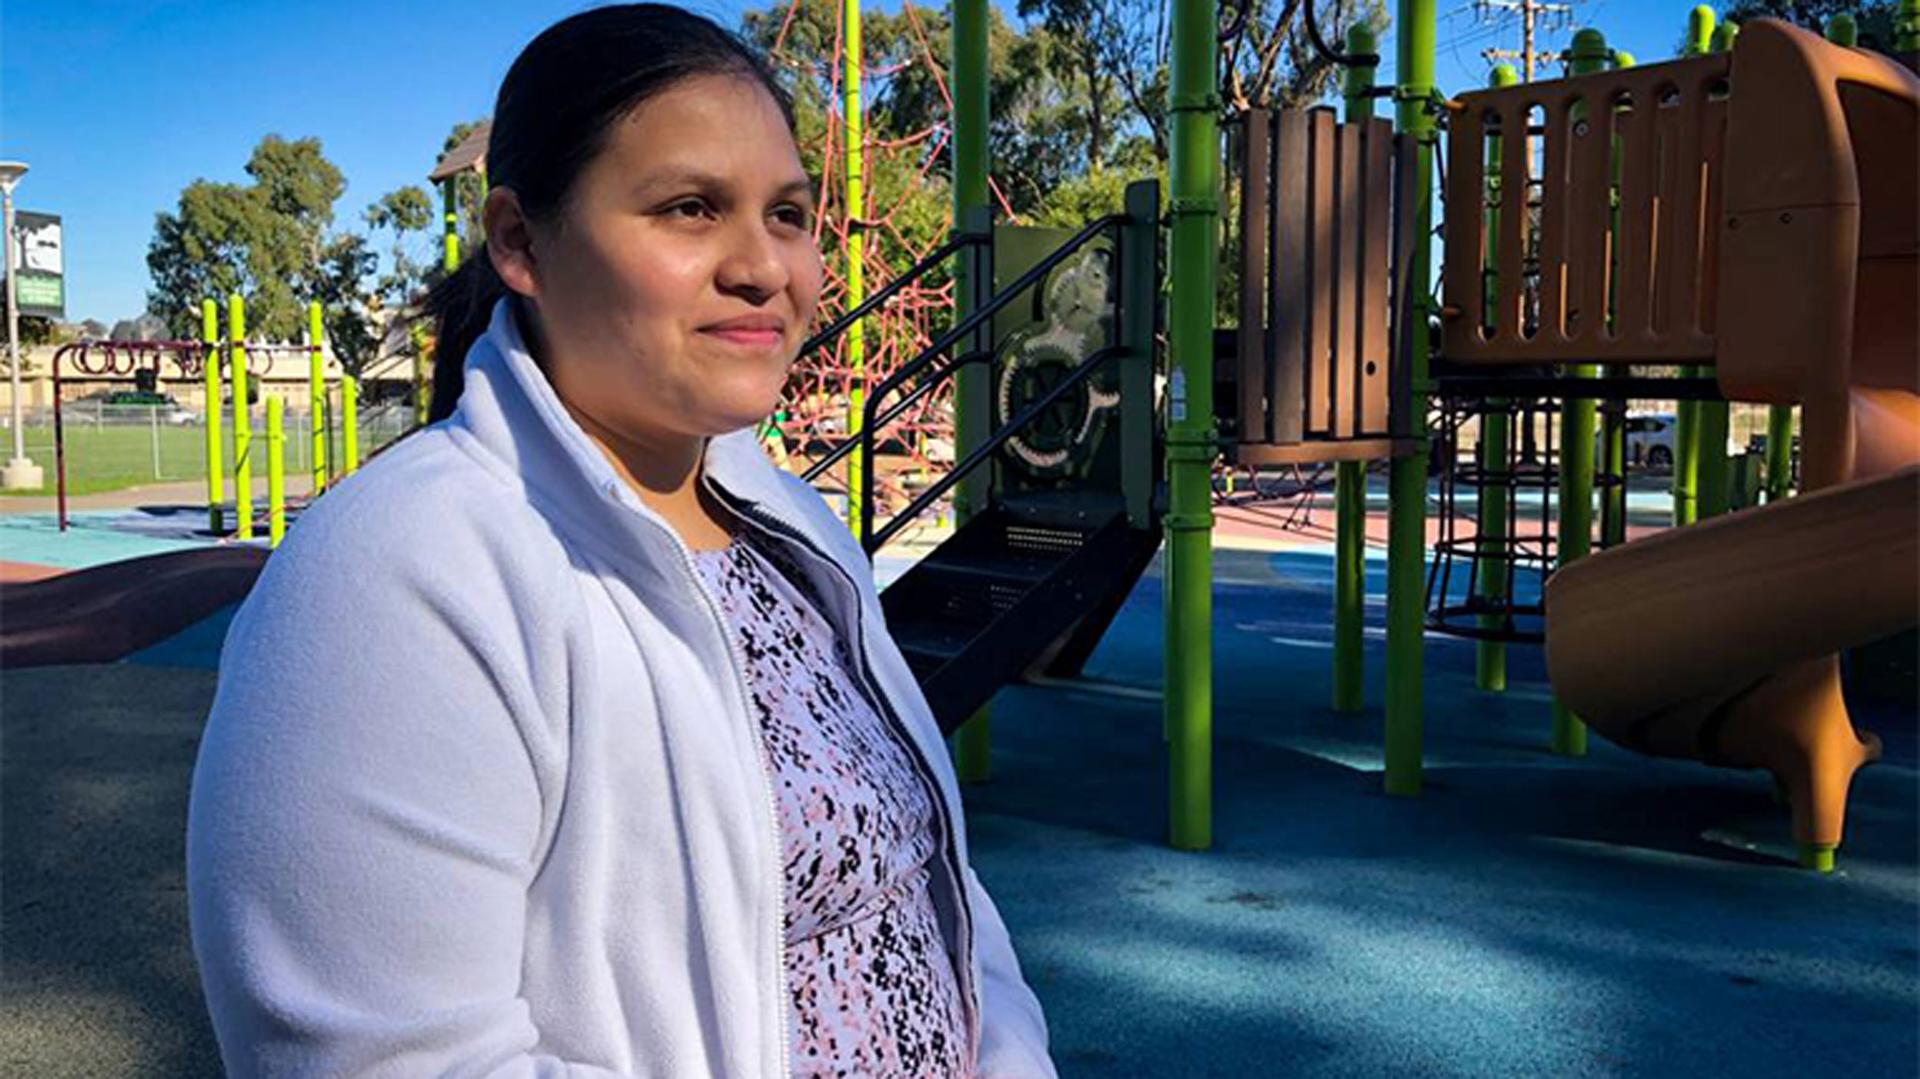 At a playground in San Francisco, Deisy Ramírez reflects on how she found safety here after fleeing captivity in Guatemala